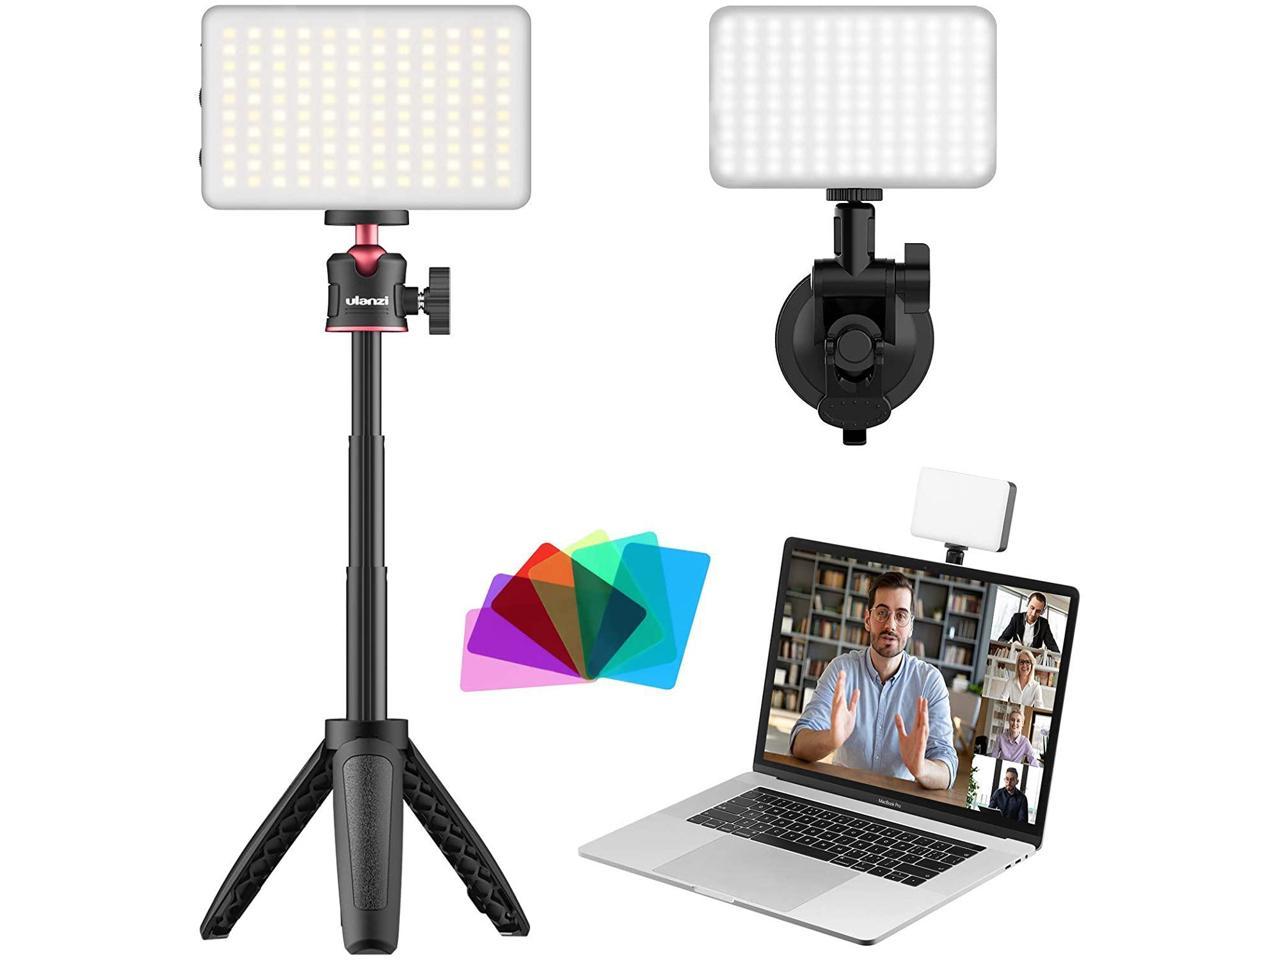 Laptop Video Conference Lighting for Remote Working Zoom Call Self Broadcasting,Online Meeting Photography Video Light with Tripod & Suction Cup ULNAZI Computer Light for Video Conferencing 